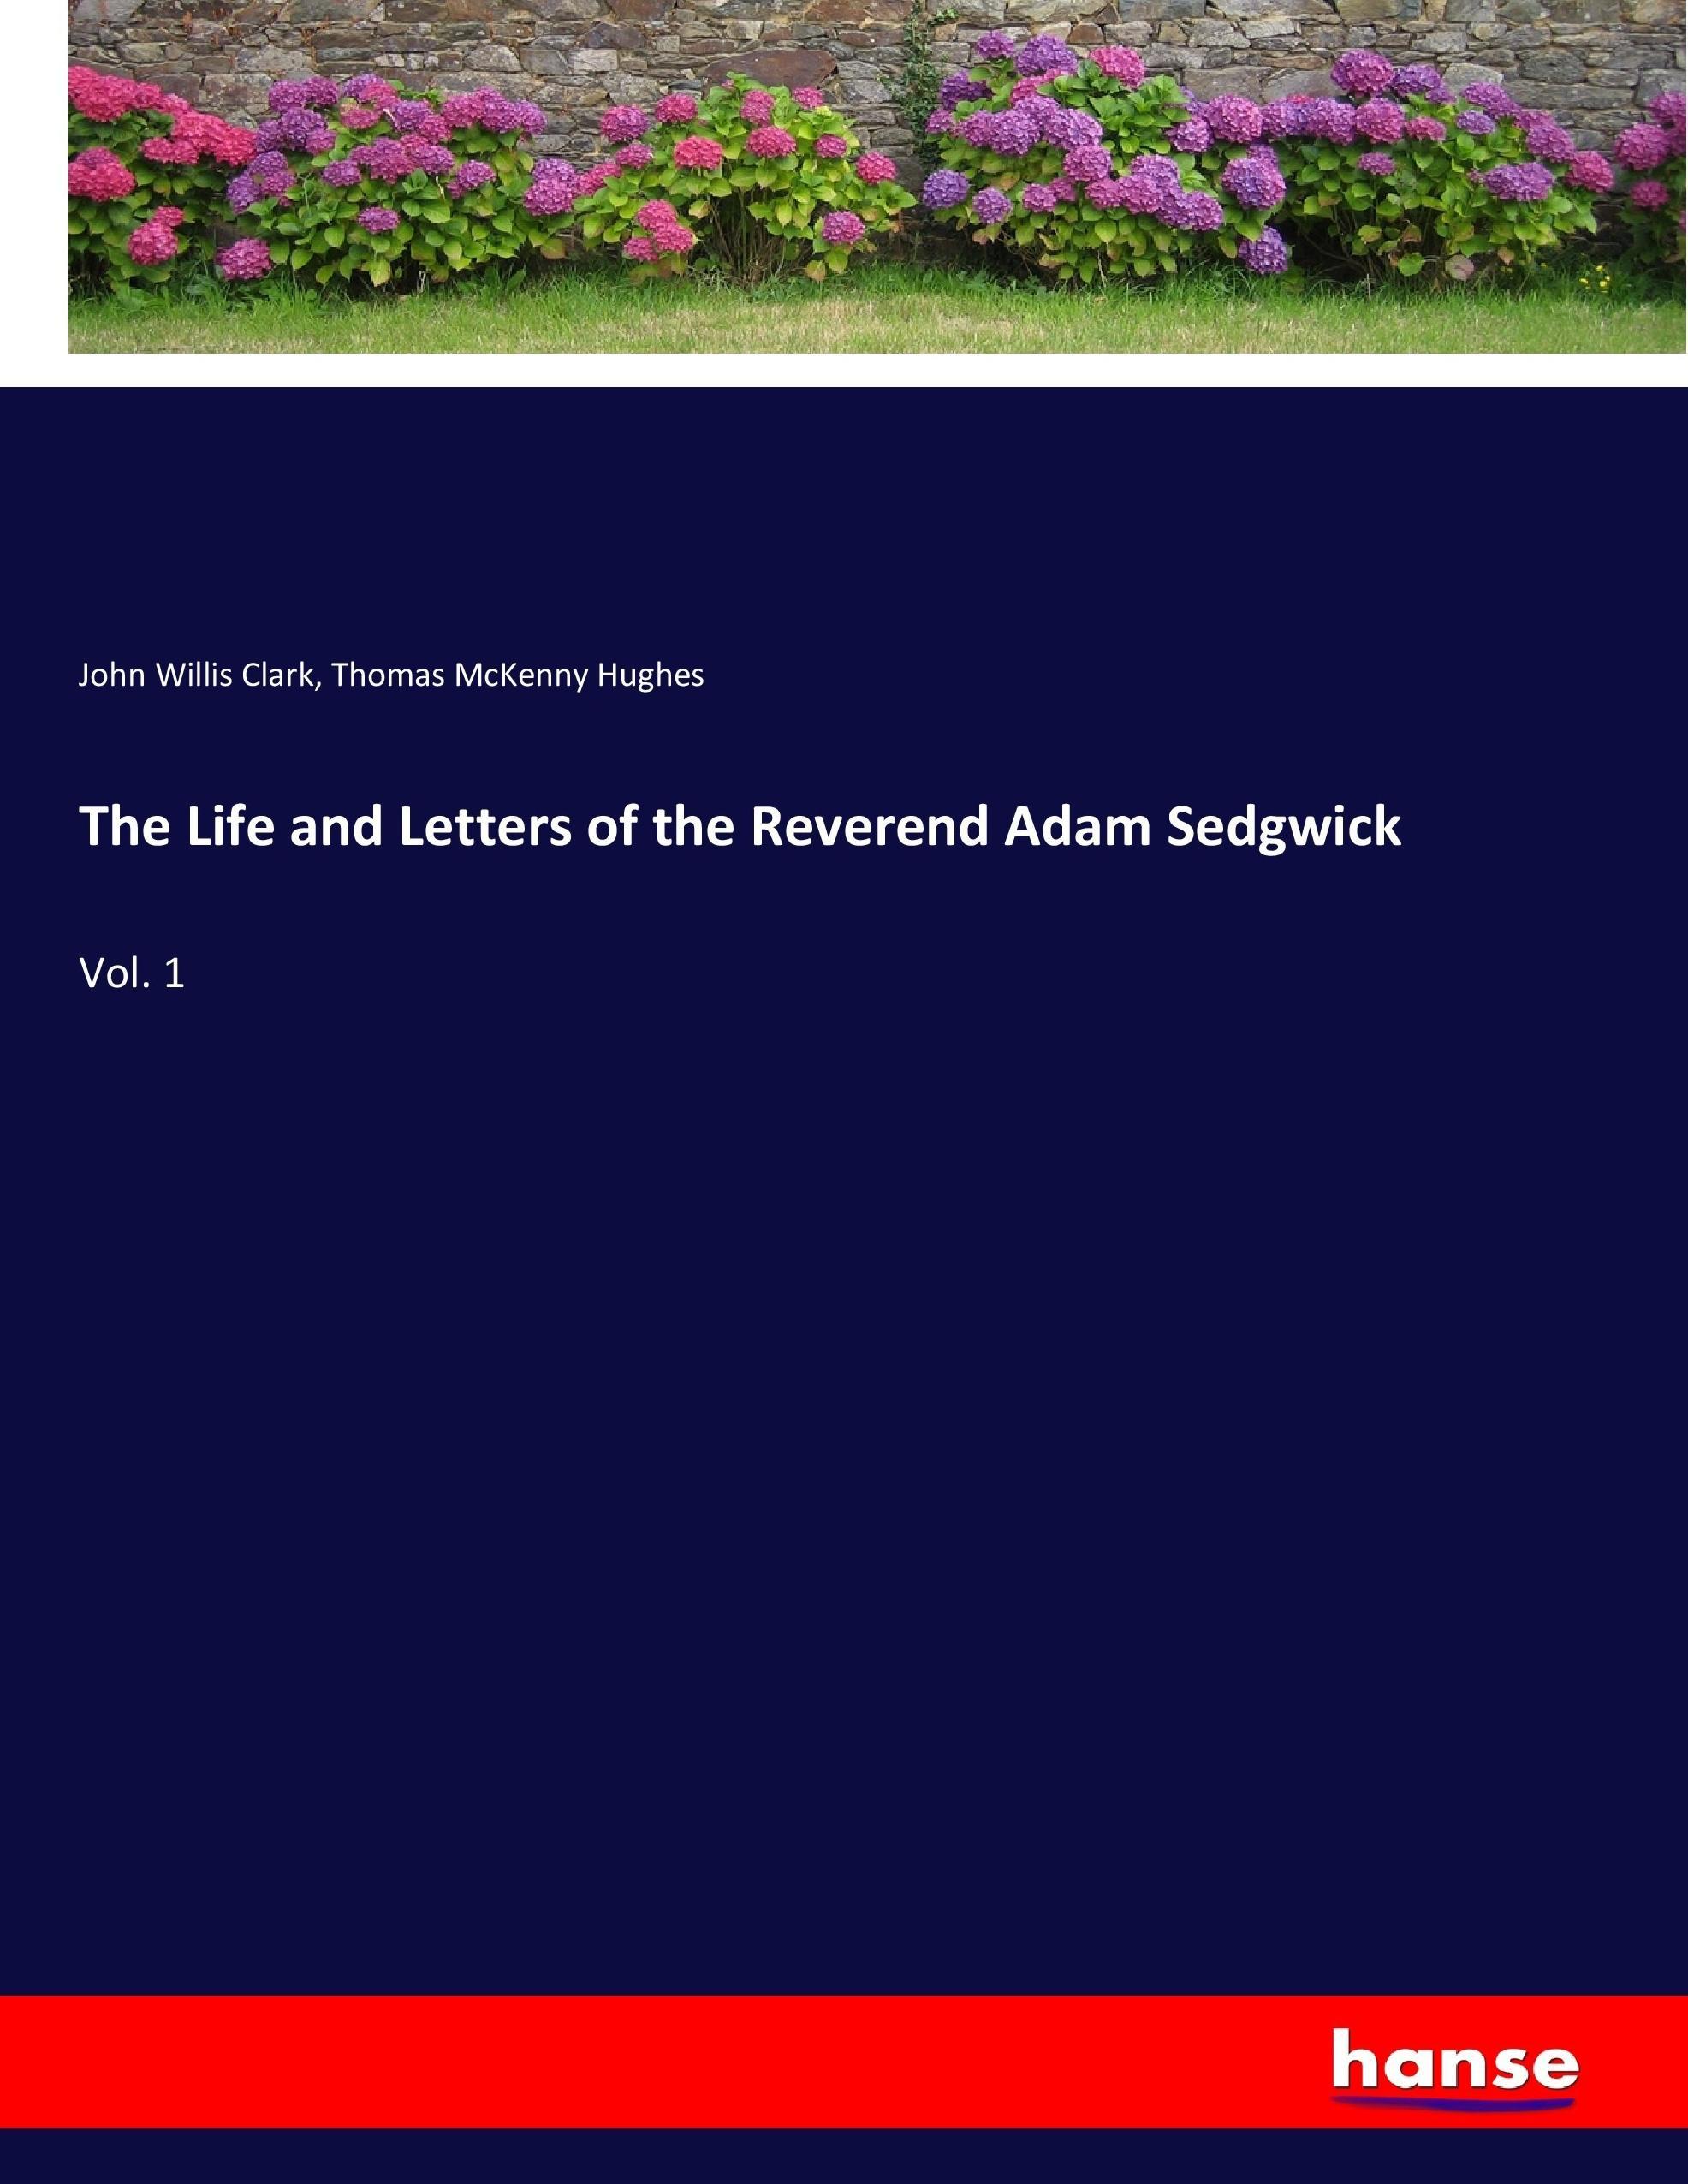 The Life and Letters of the Reverend Adam Sedgwick - Clark, John Willis Hughes, Thomas McKenny